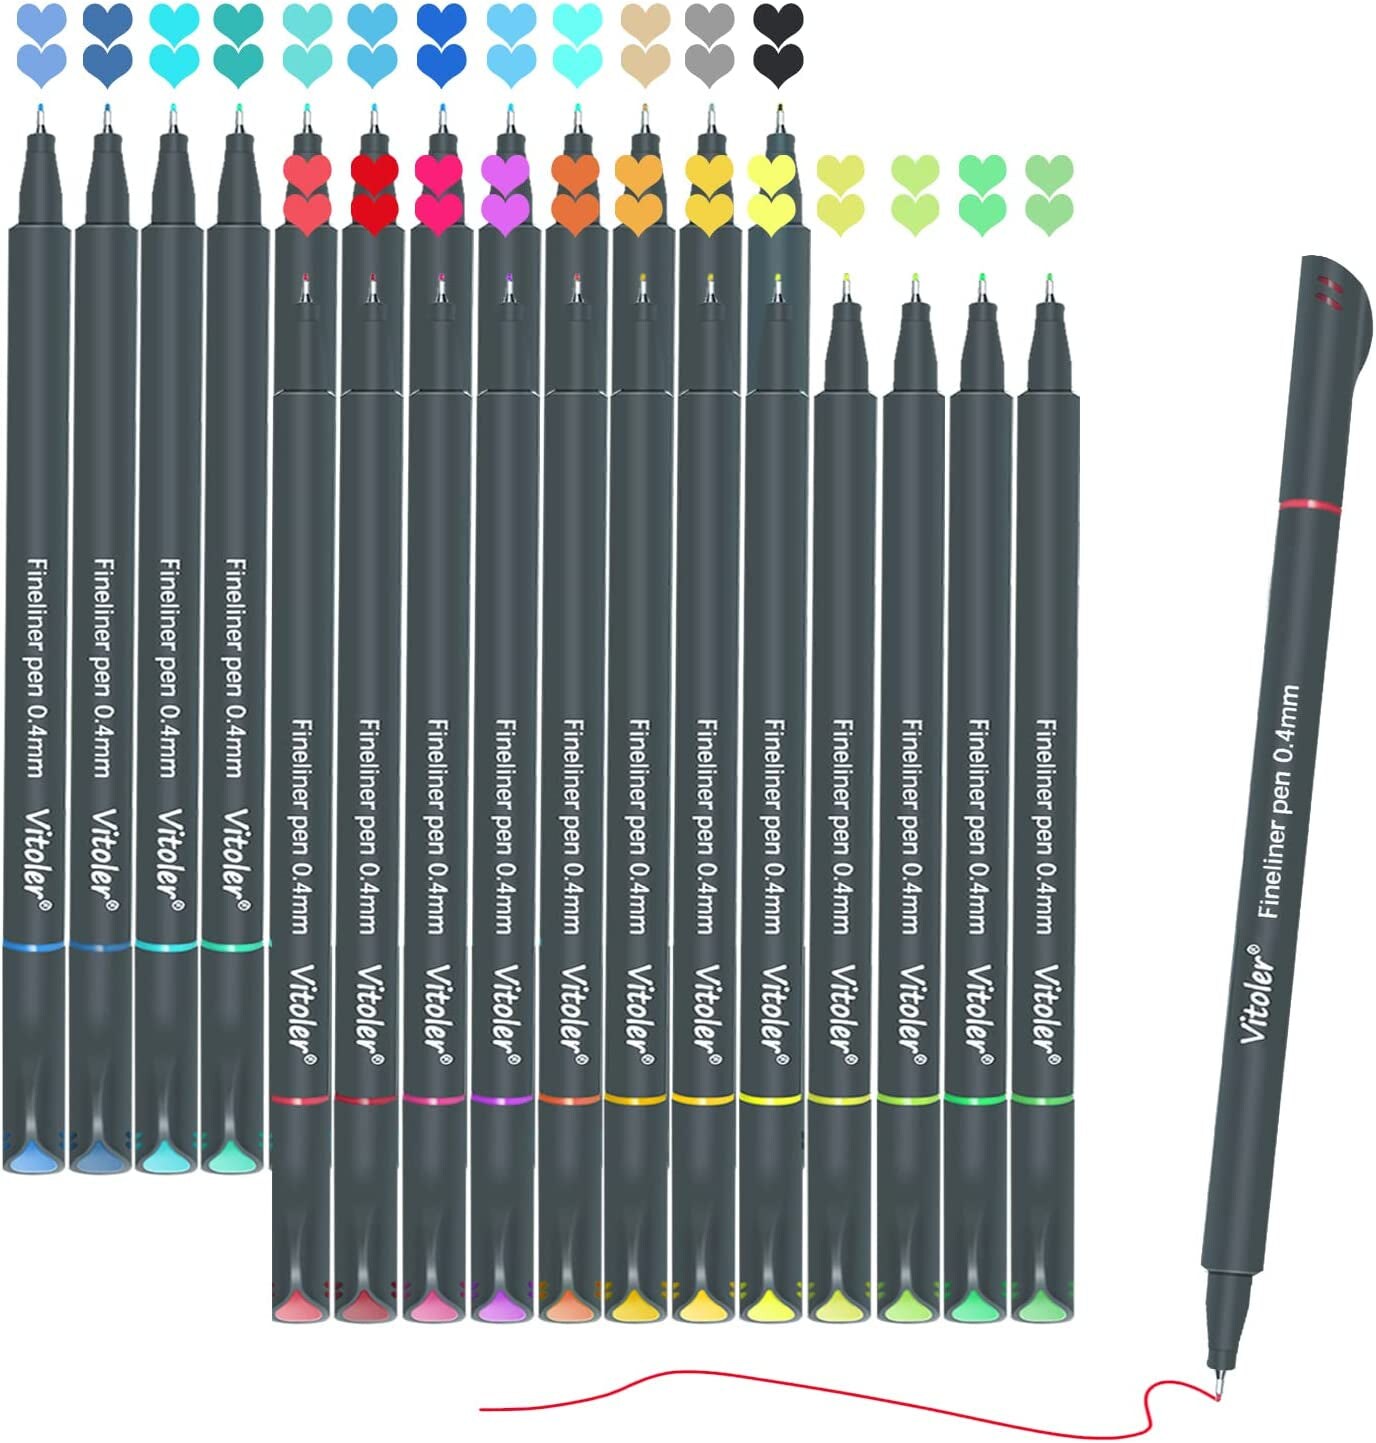 GPLMQ Black Drawing Pens, 12 Pack Felt Tip Markers for Adults and Kids,  Dual Brush Fineliners Pens for Art Drawing Sketching Calligraphy